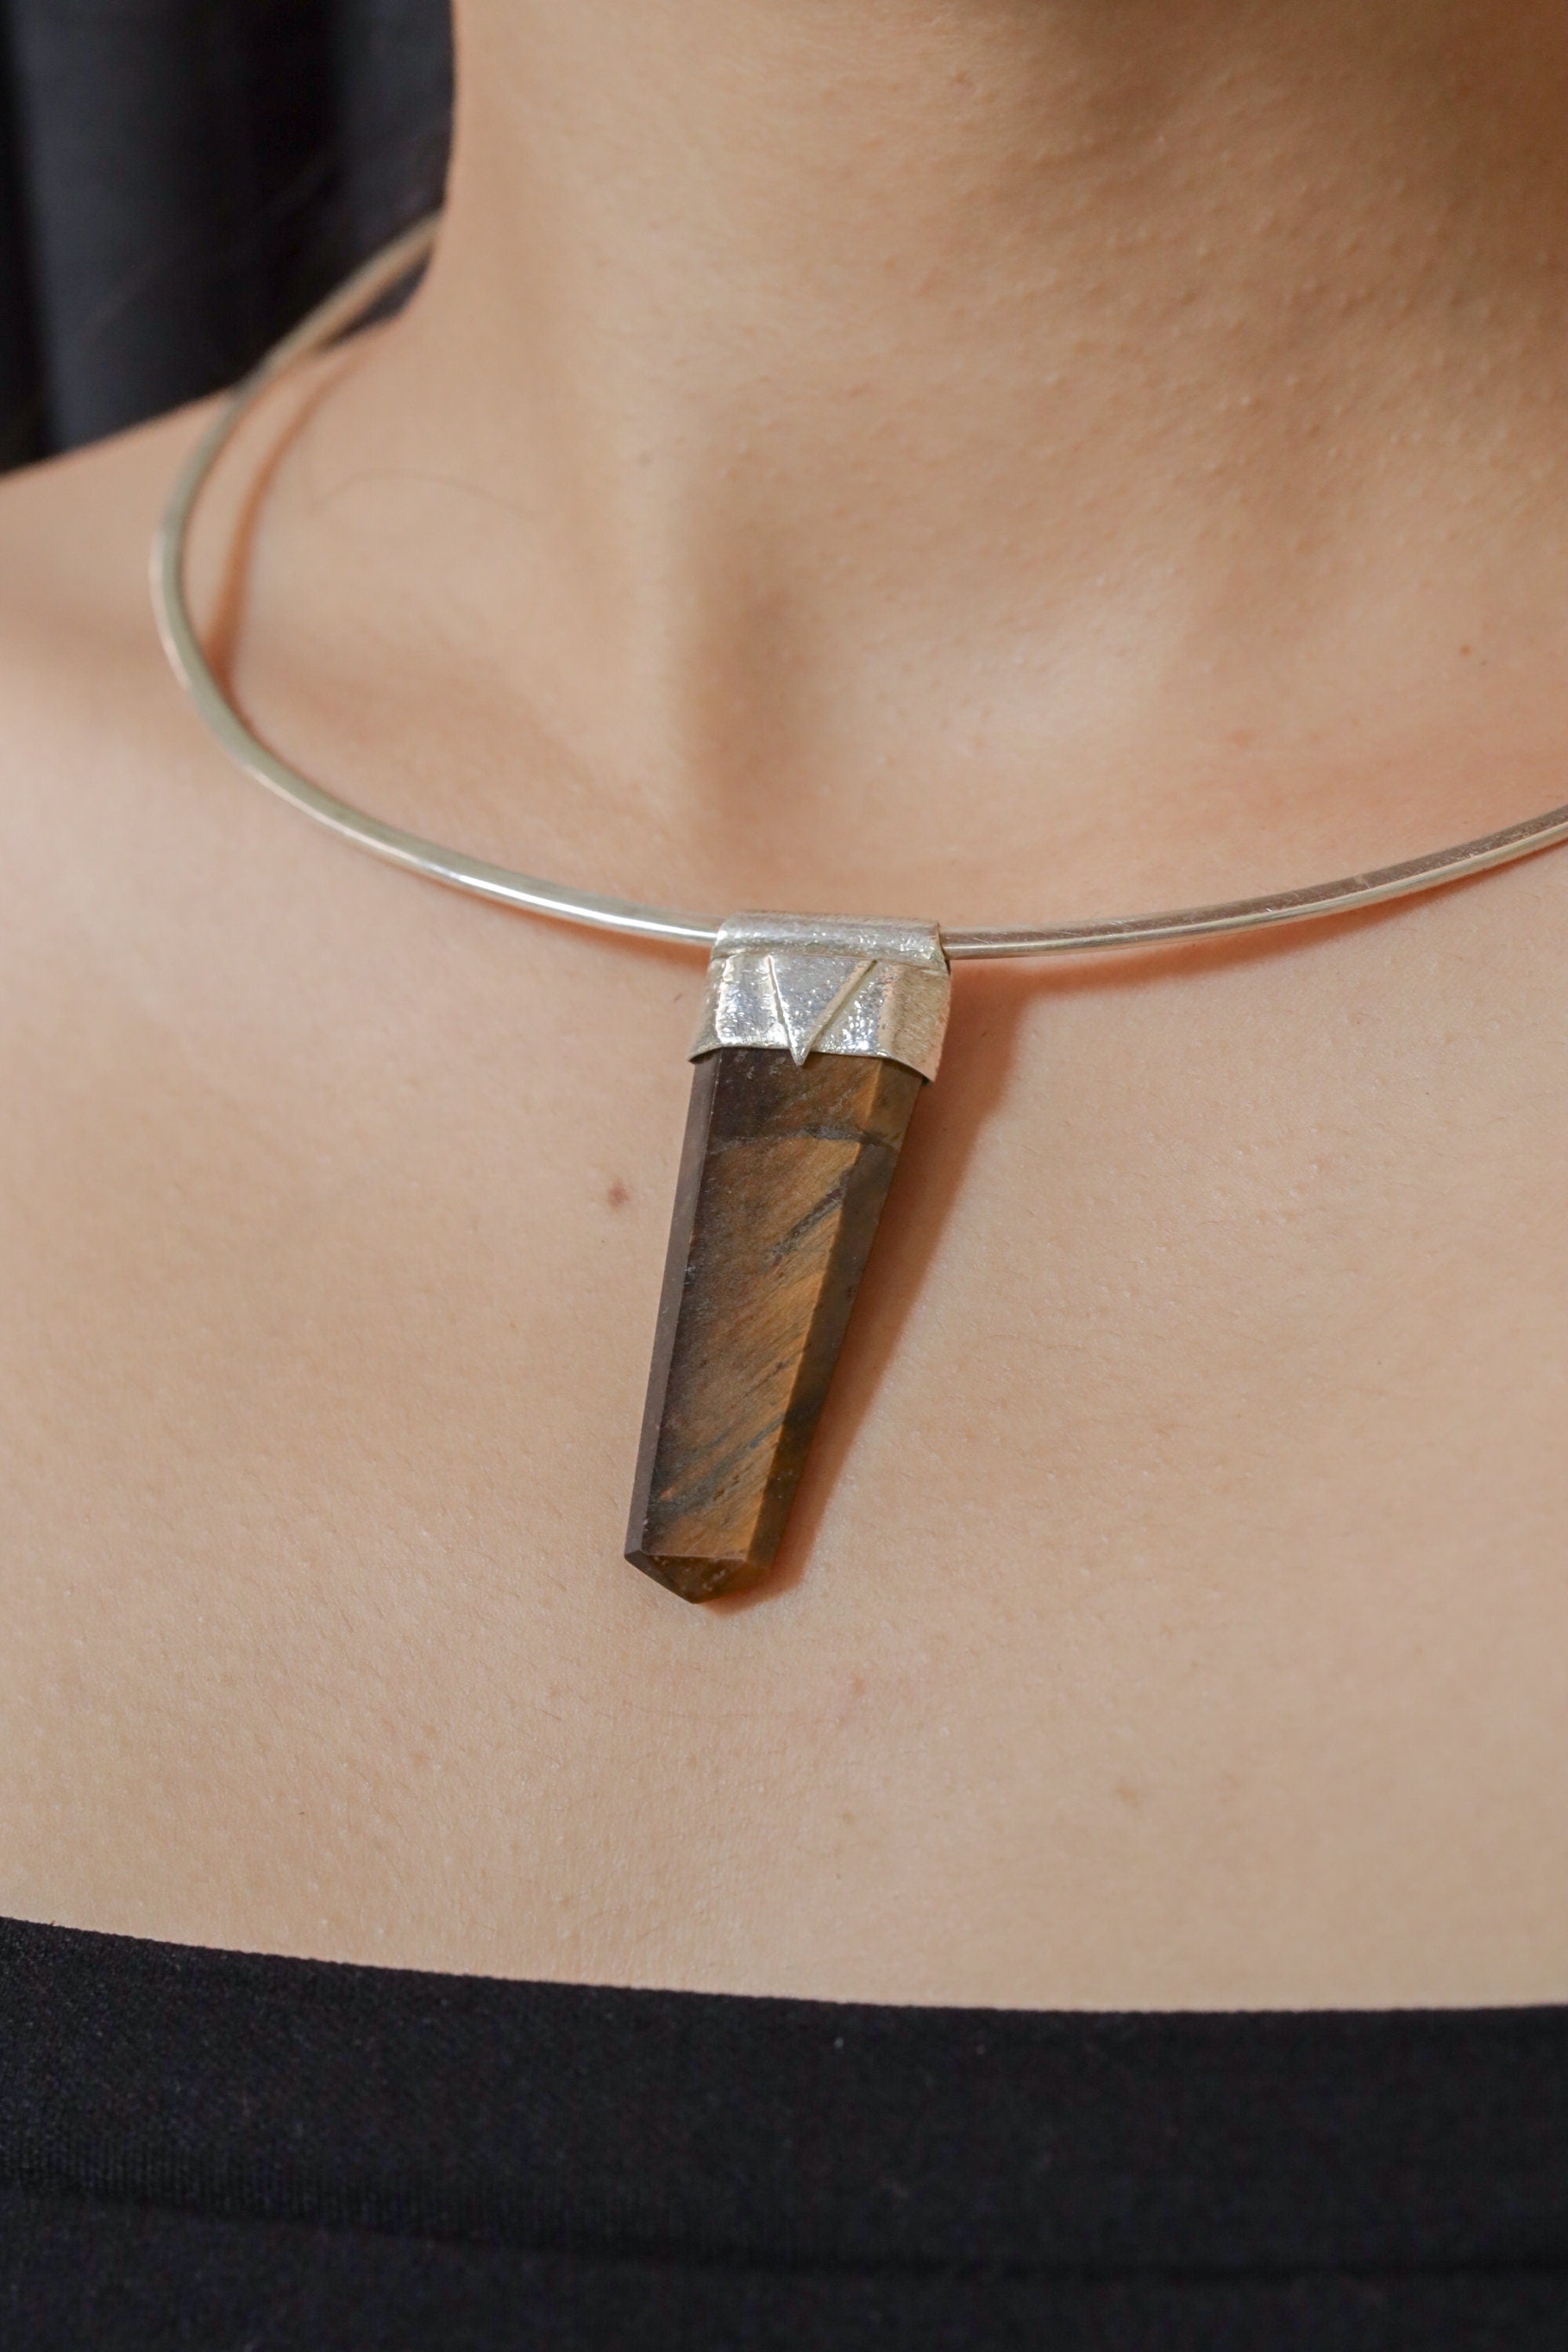 New photo Obelic Cut Tiger Eye Point - Stack Pendant - Organic Textured 925 Sterling Silver - Crystal Necklace